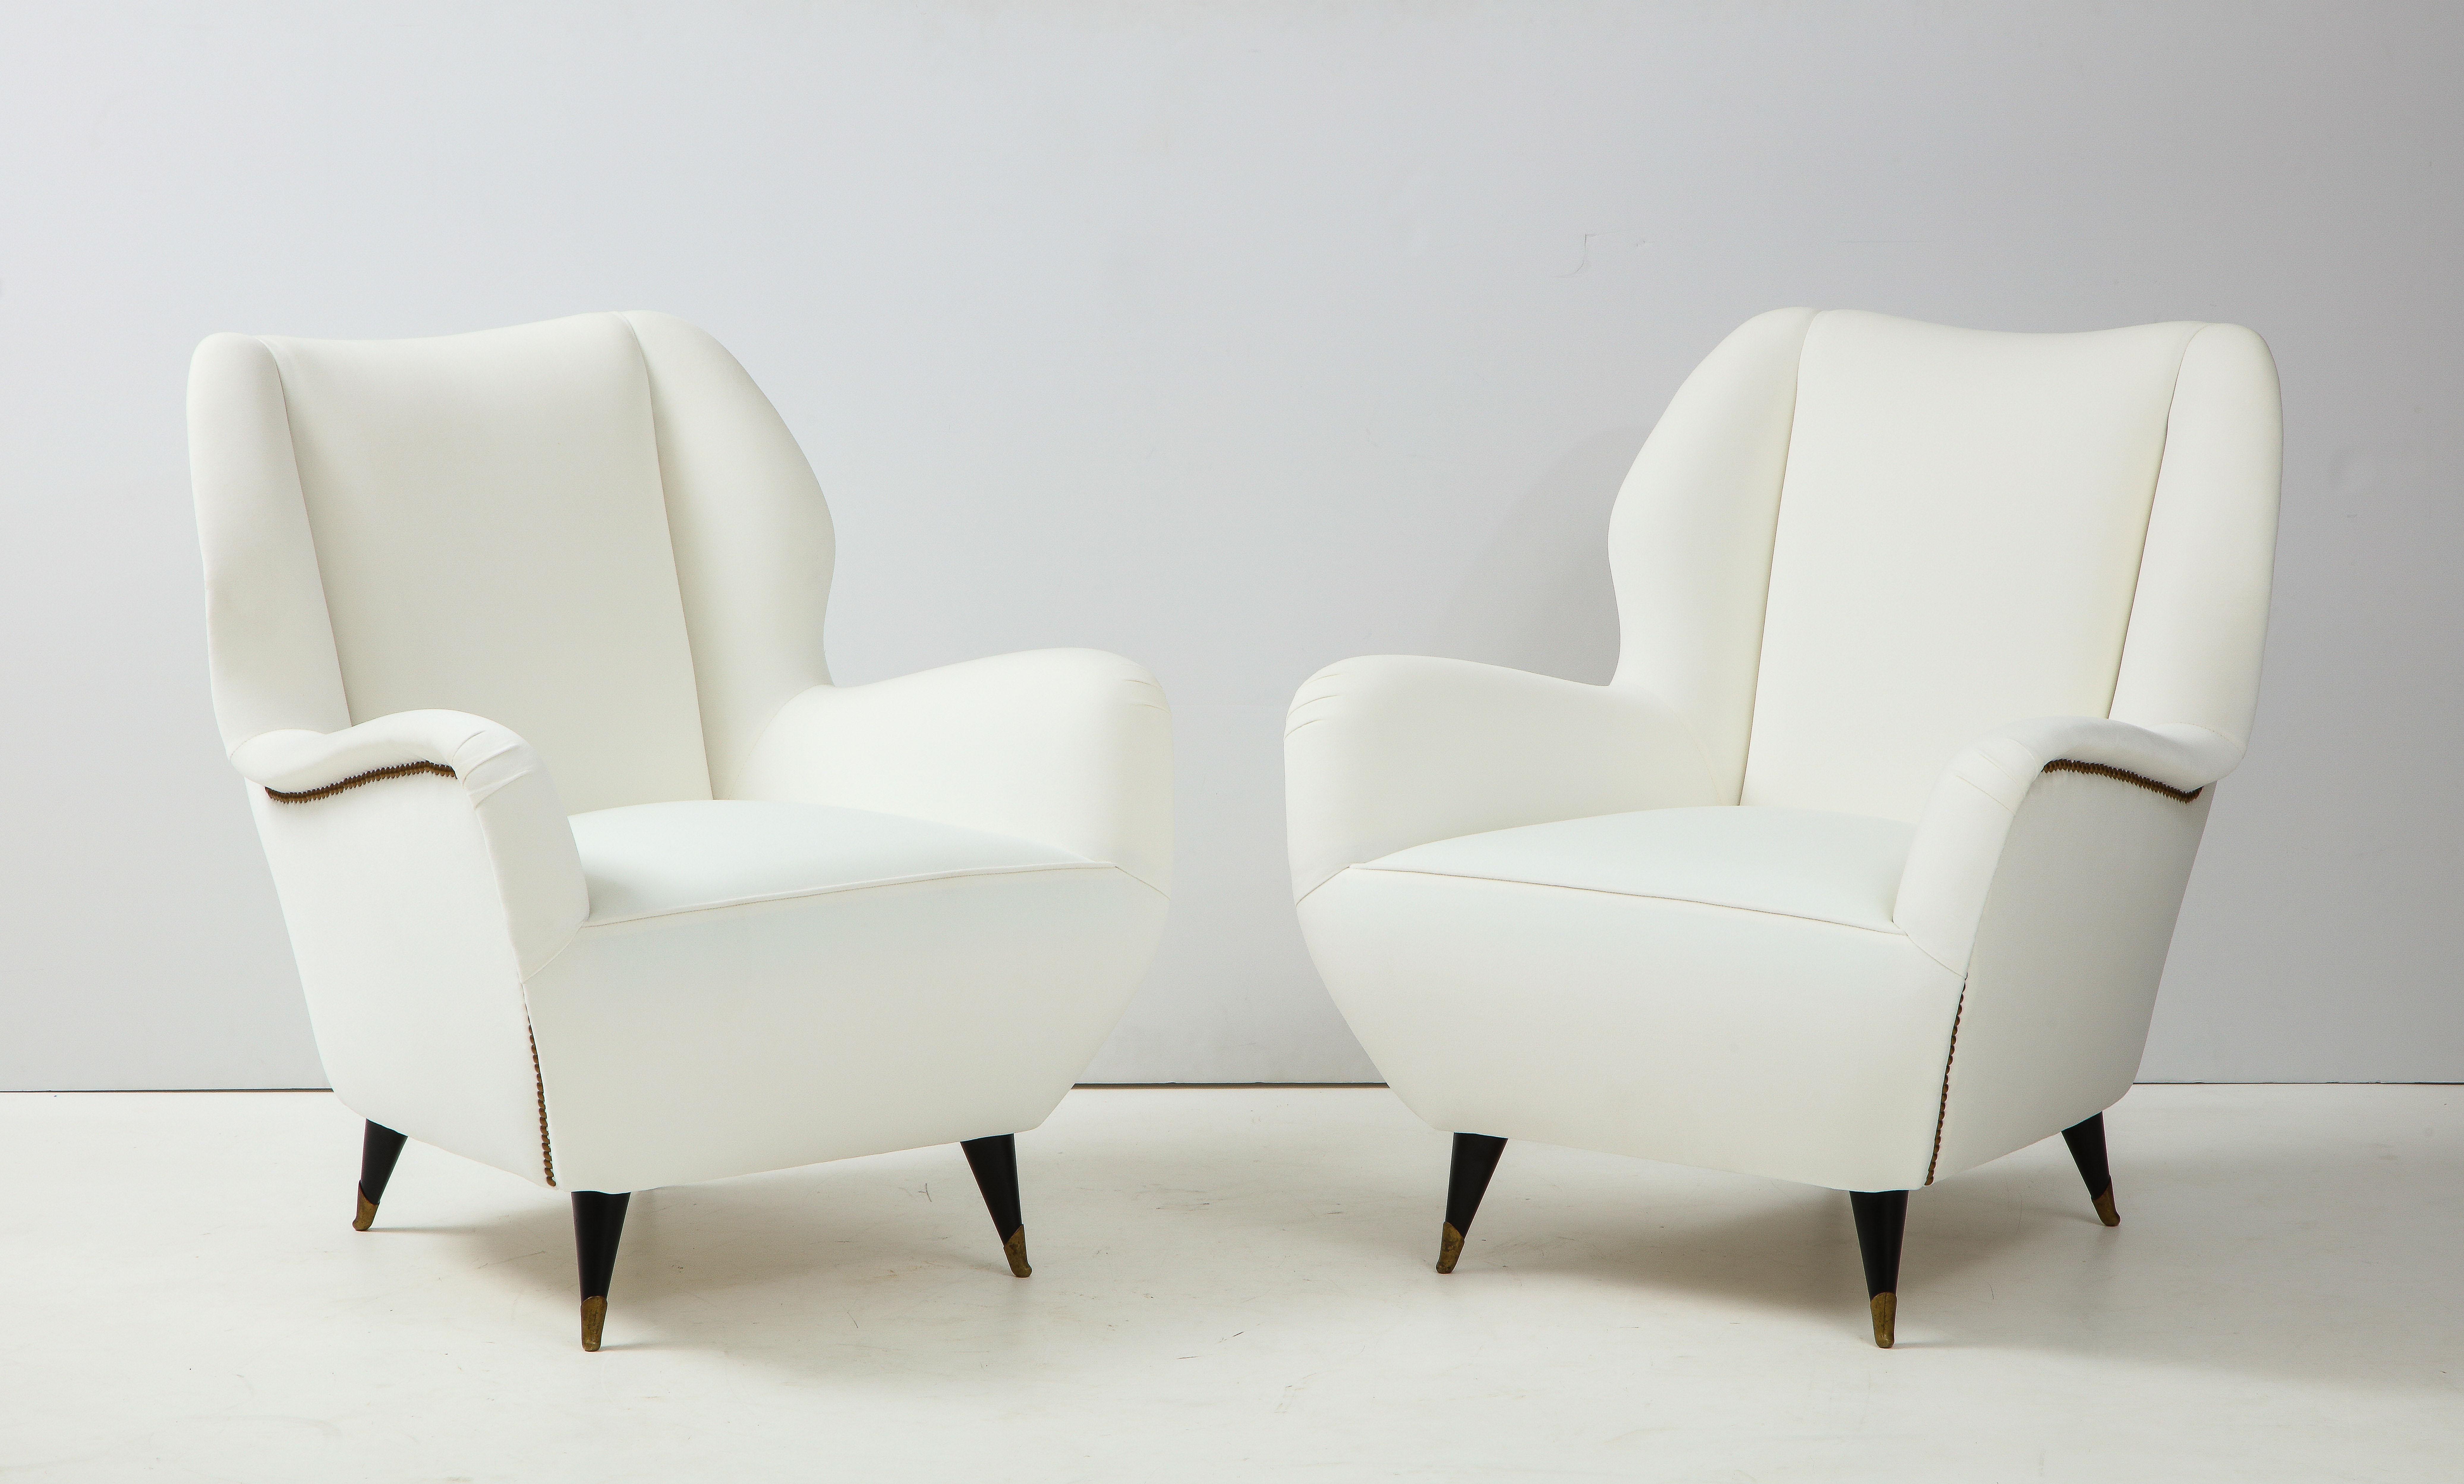 A very elegant pair of Italian vintage mid century modern lounge chairs; their highly sculptural shape is complemented by custom originally designed brass nail heads. Beautifully proportioned with a comfortable and wide seat, the whole is supported